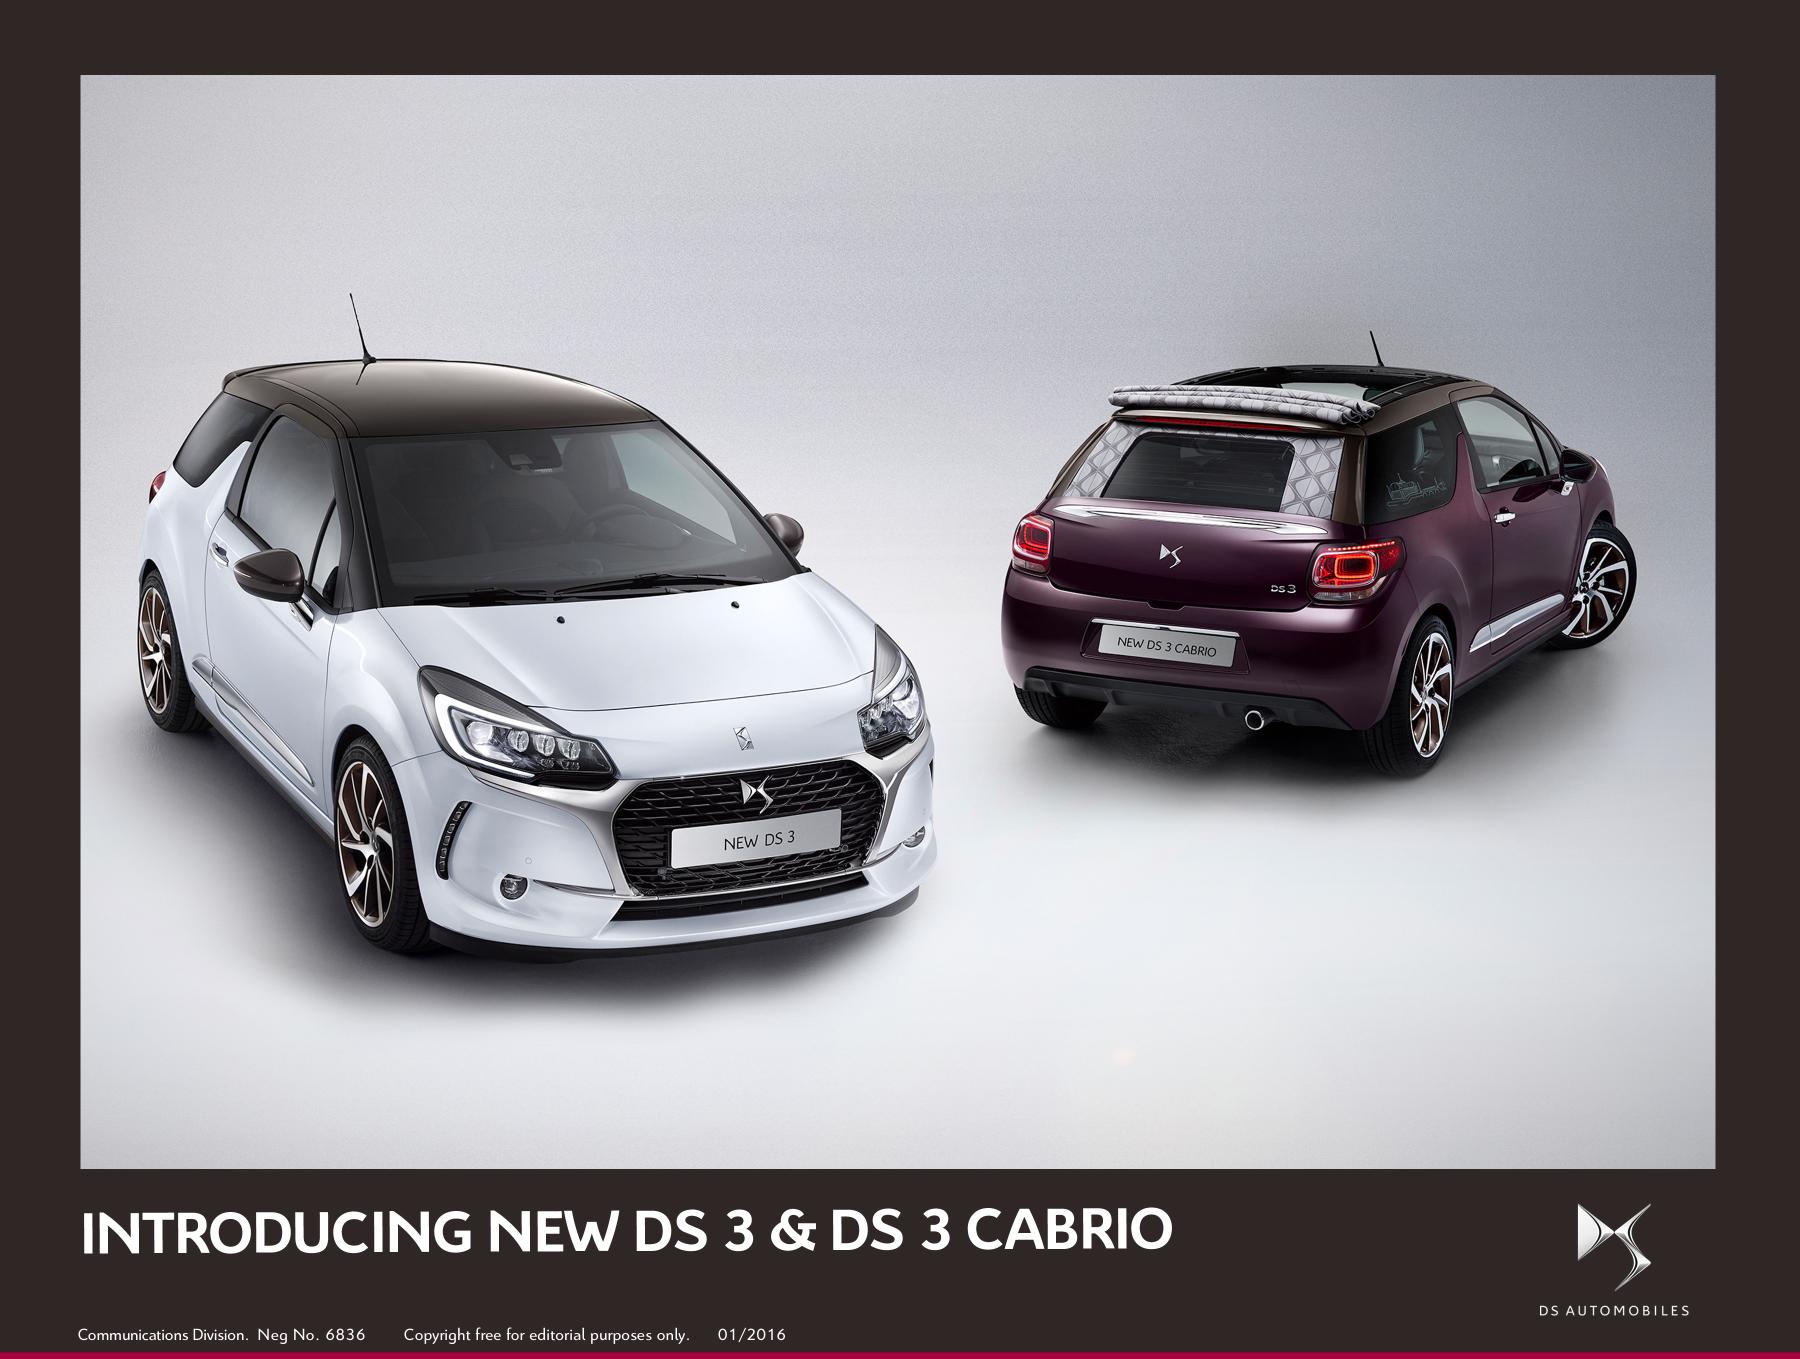 New DS 3 Hatch & DS 3 Cabrio